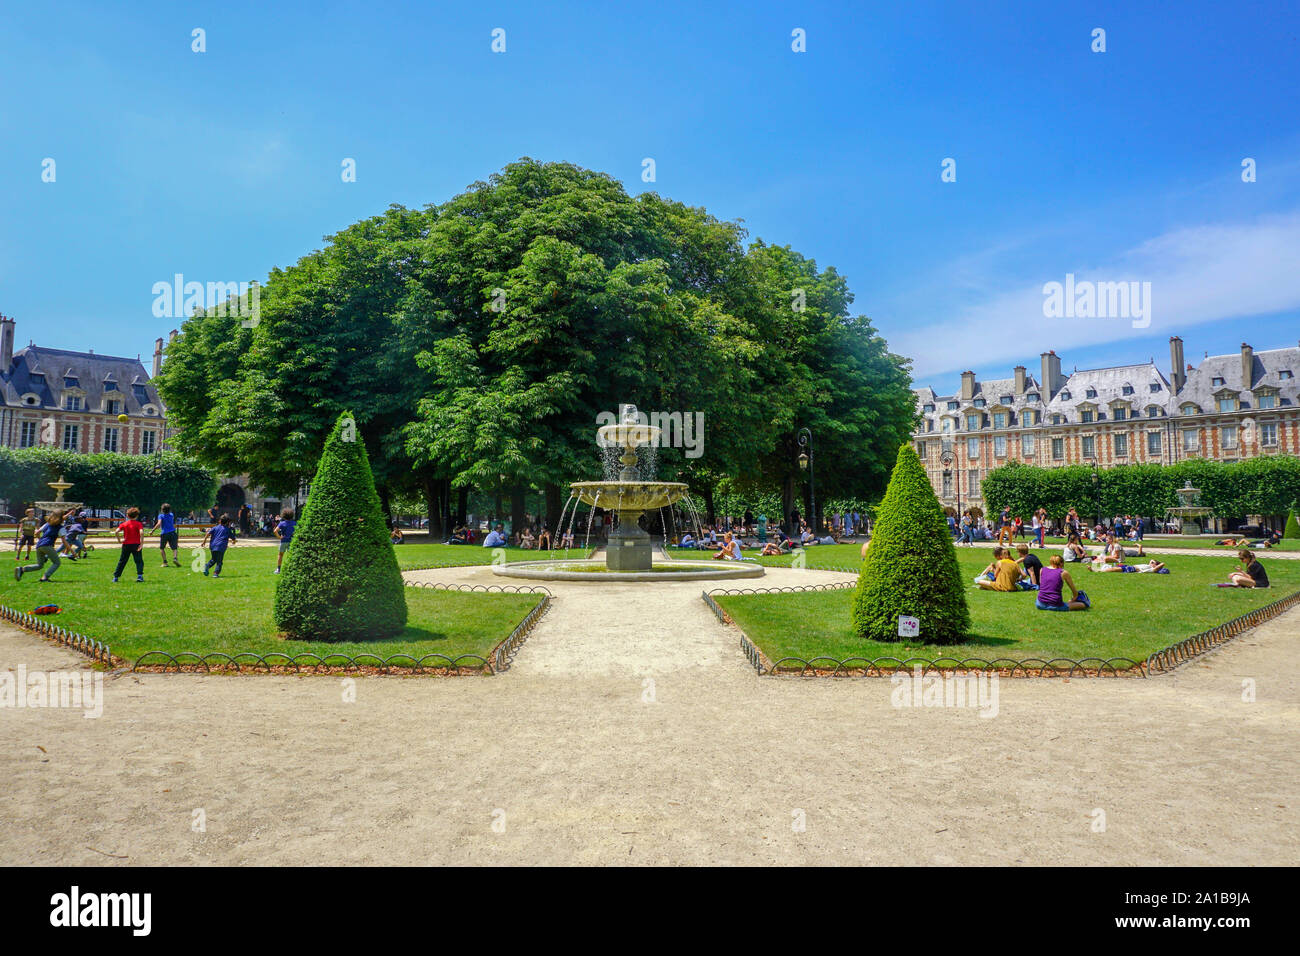 Summer in Place des Vosges-Image captured during a wonderful sunny day strollexploring anddiscovering thepark's beautyand the surrounding neighborhood. Stock Photo